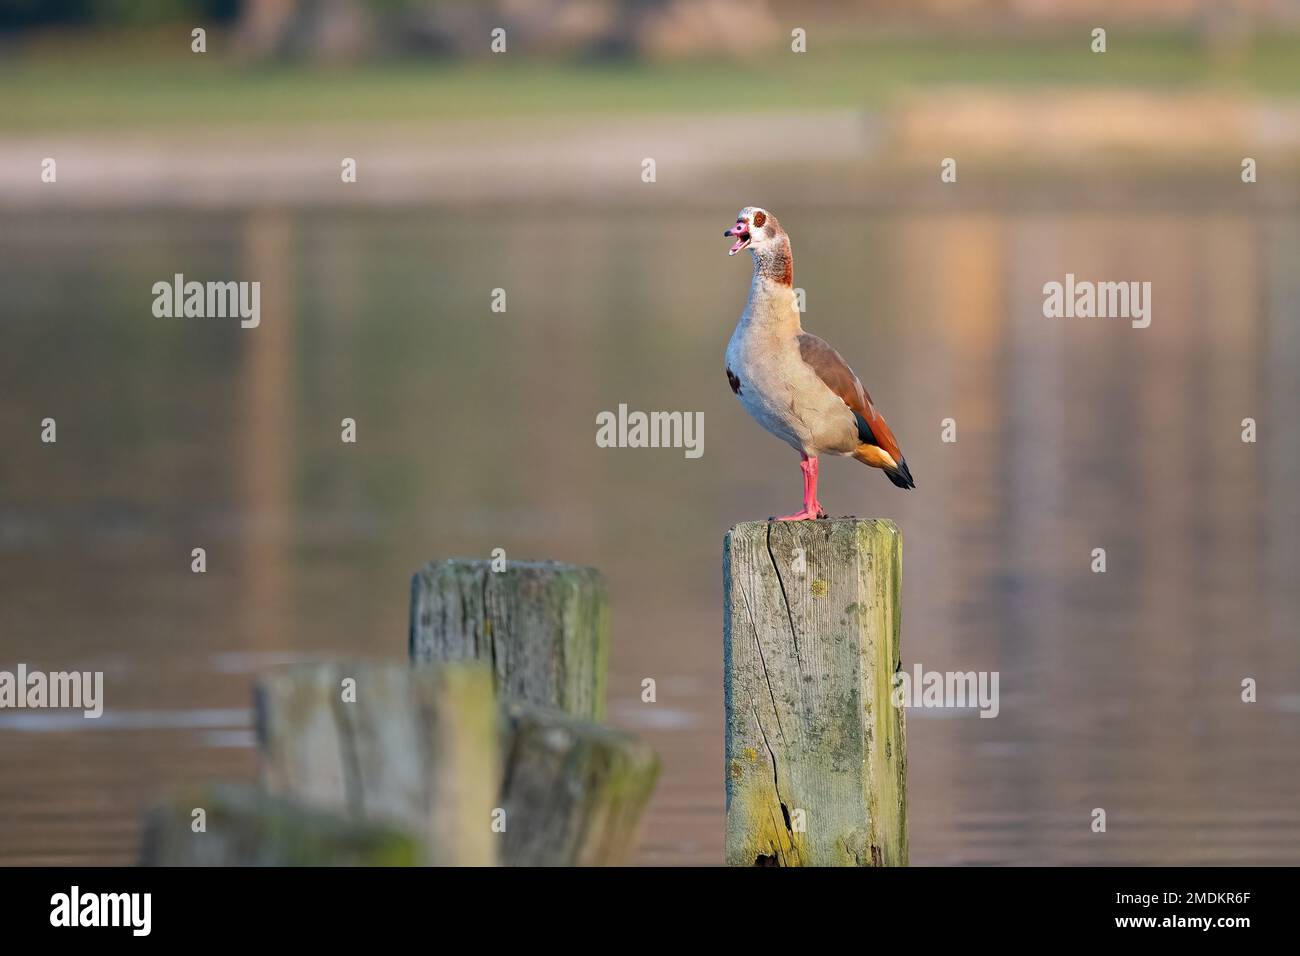 Egyptian goose (Alopochen aegyptiacus), sitting on a post in water calling, Germany Stock Photo